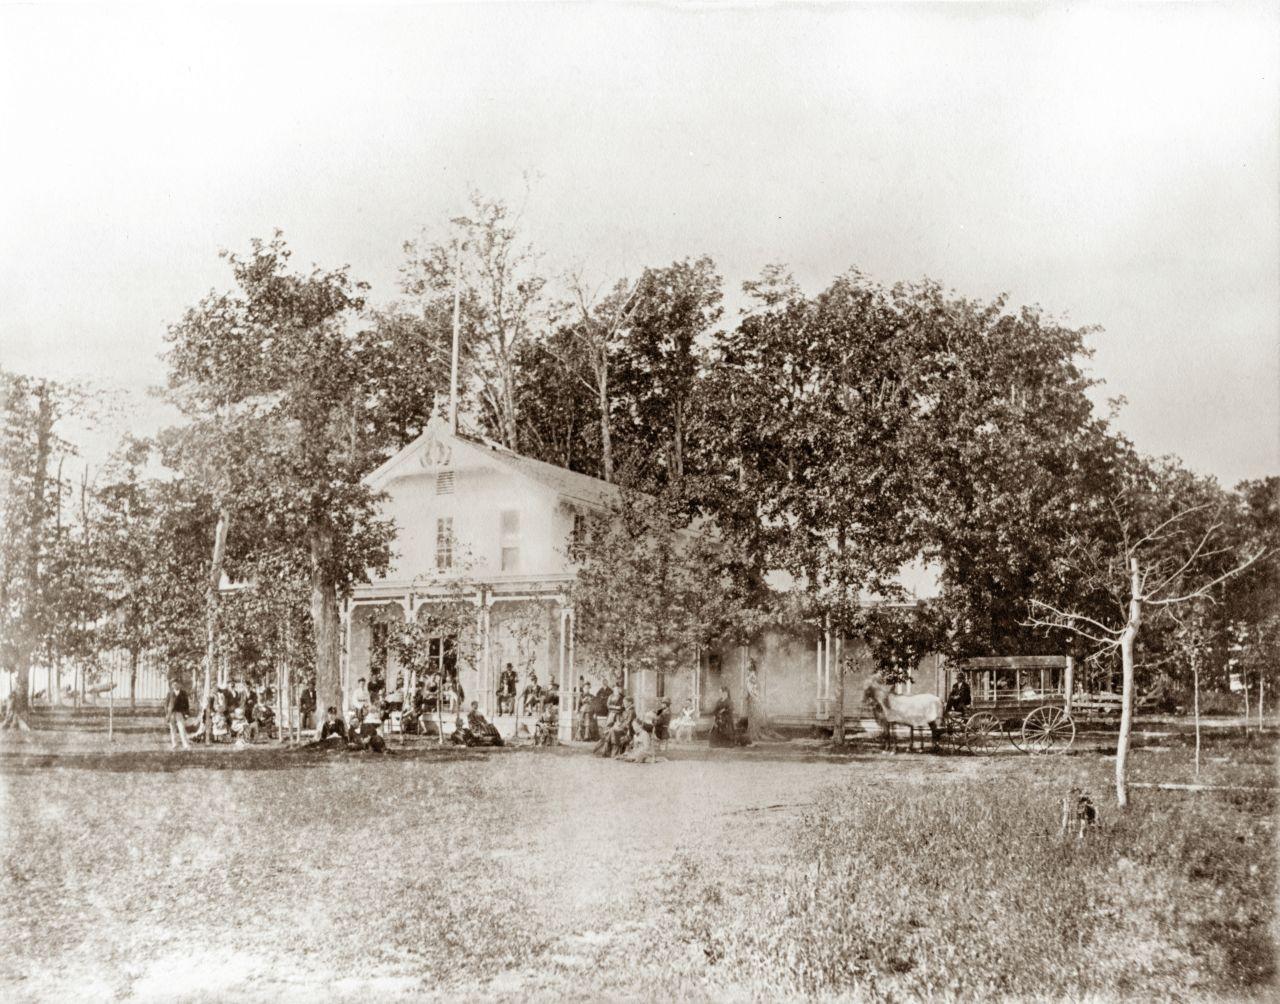 Original Club House Built 1874, cost of $2,340 (Source: Dr. Martin Taliak Collection)